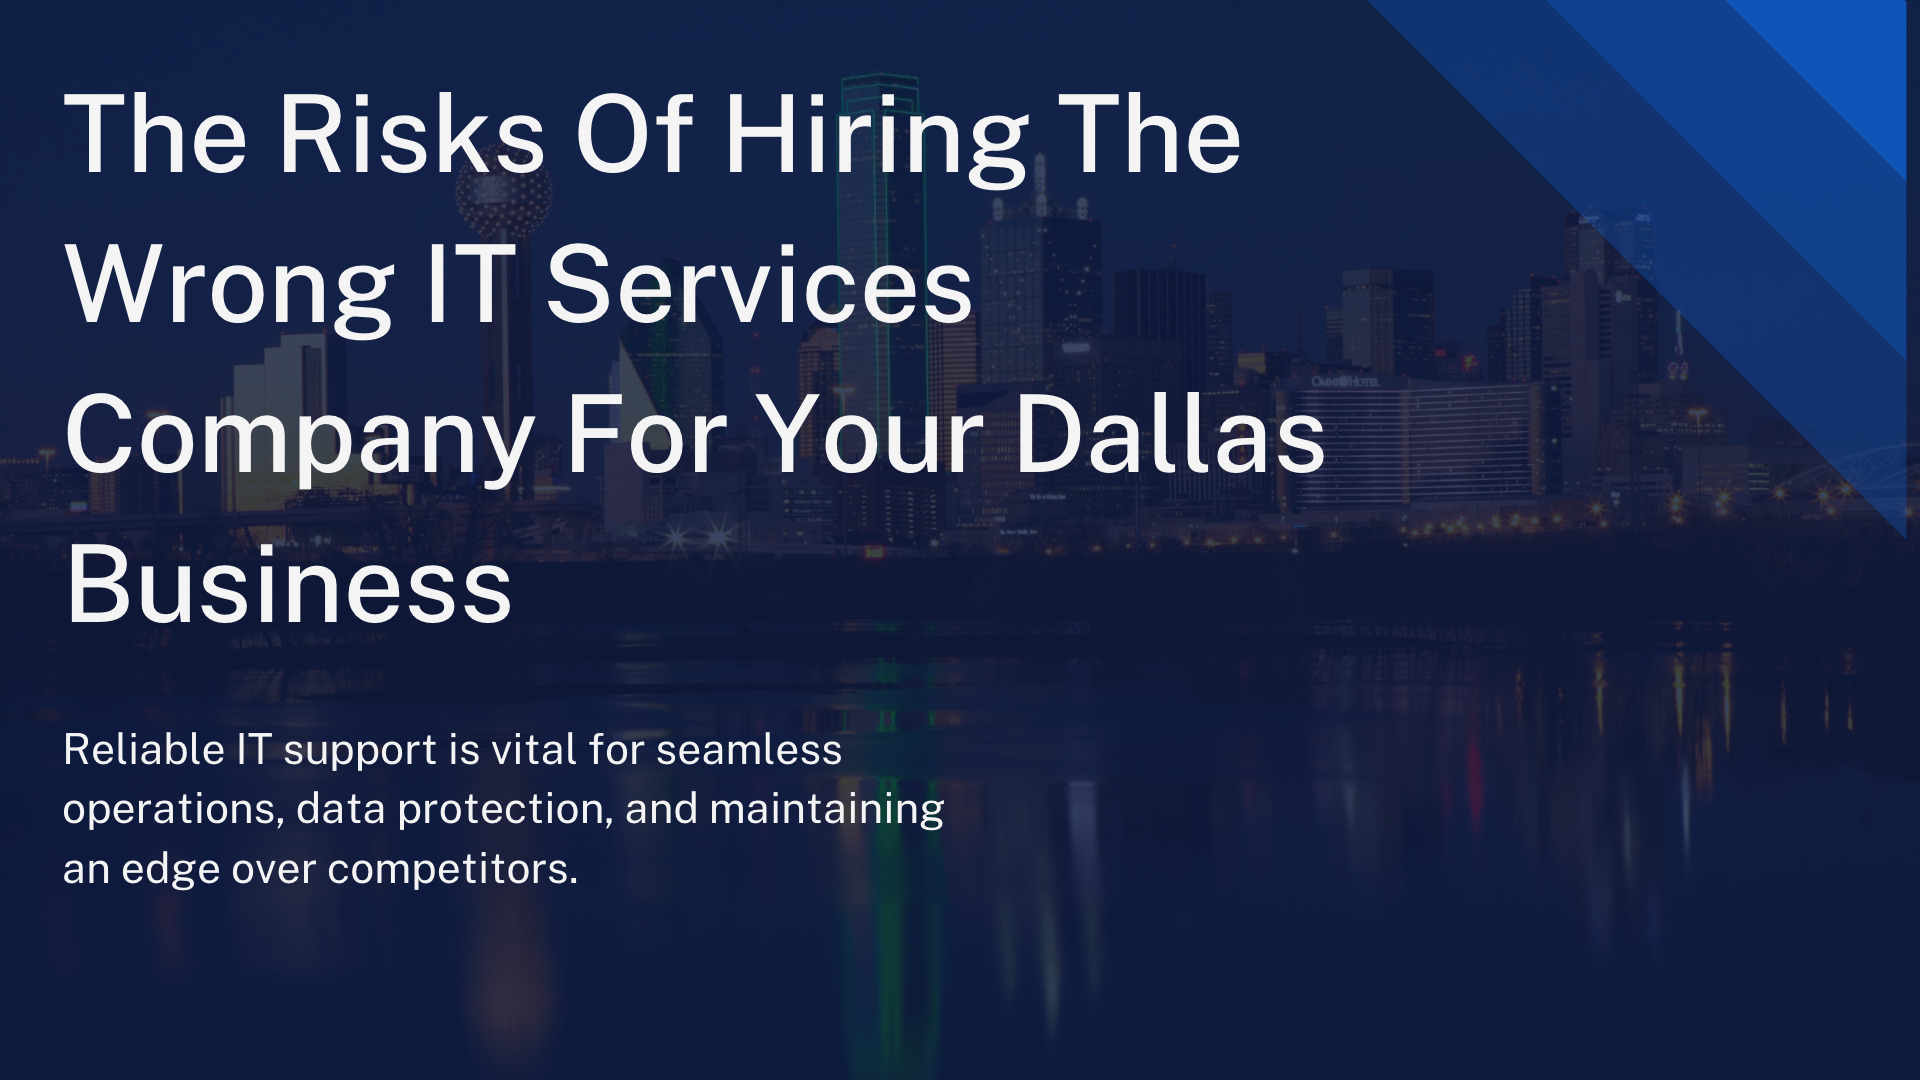 The Risks Of Hiring The Wrong IT Services Company For Your Dallas Business